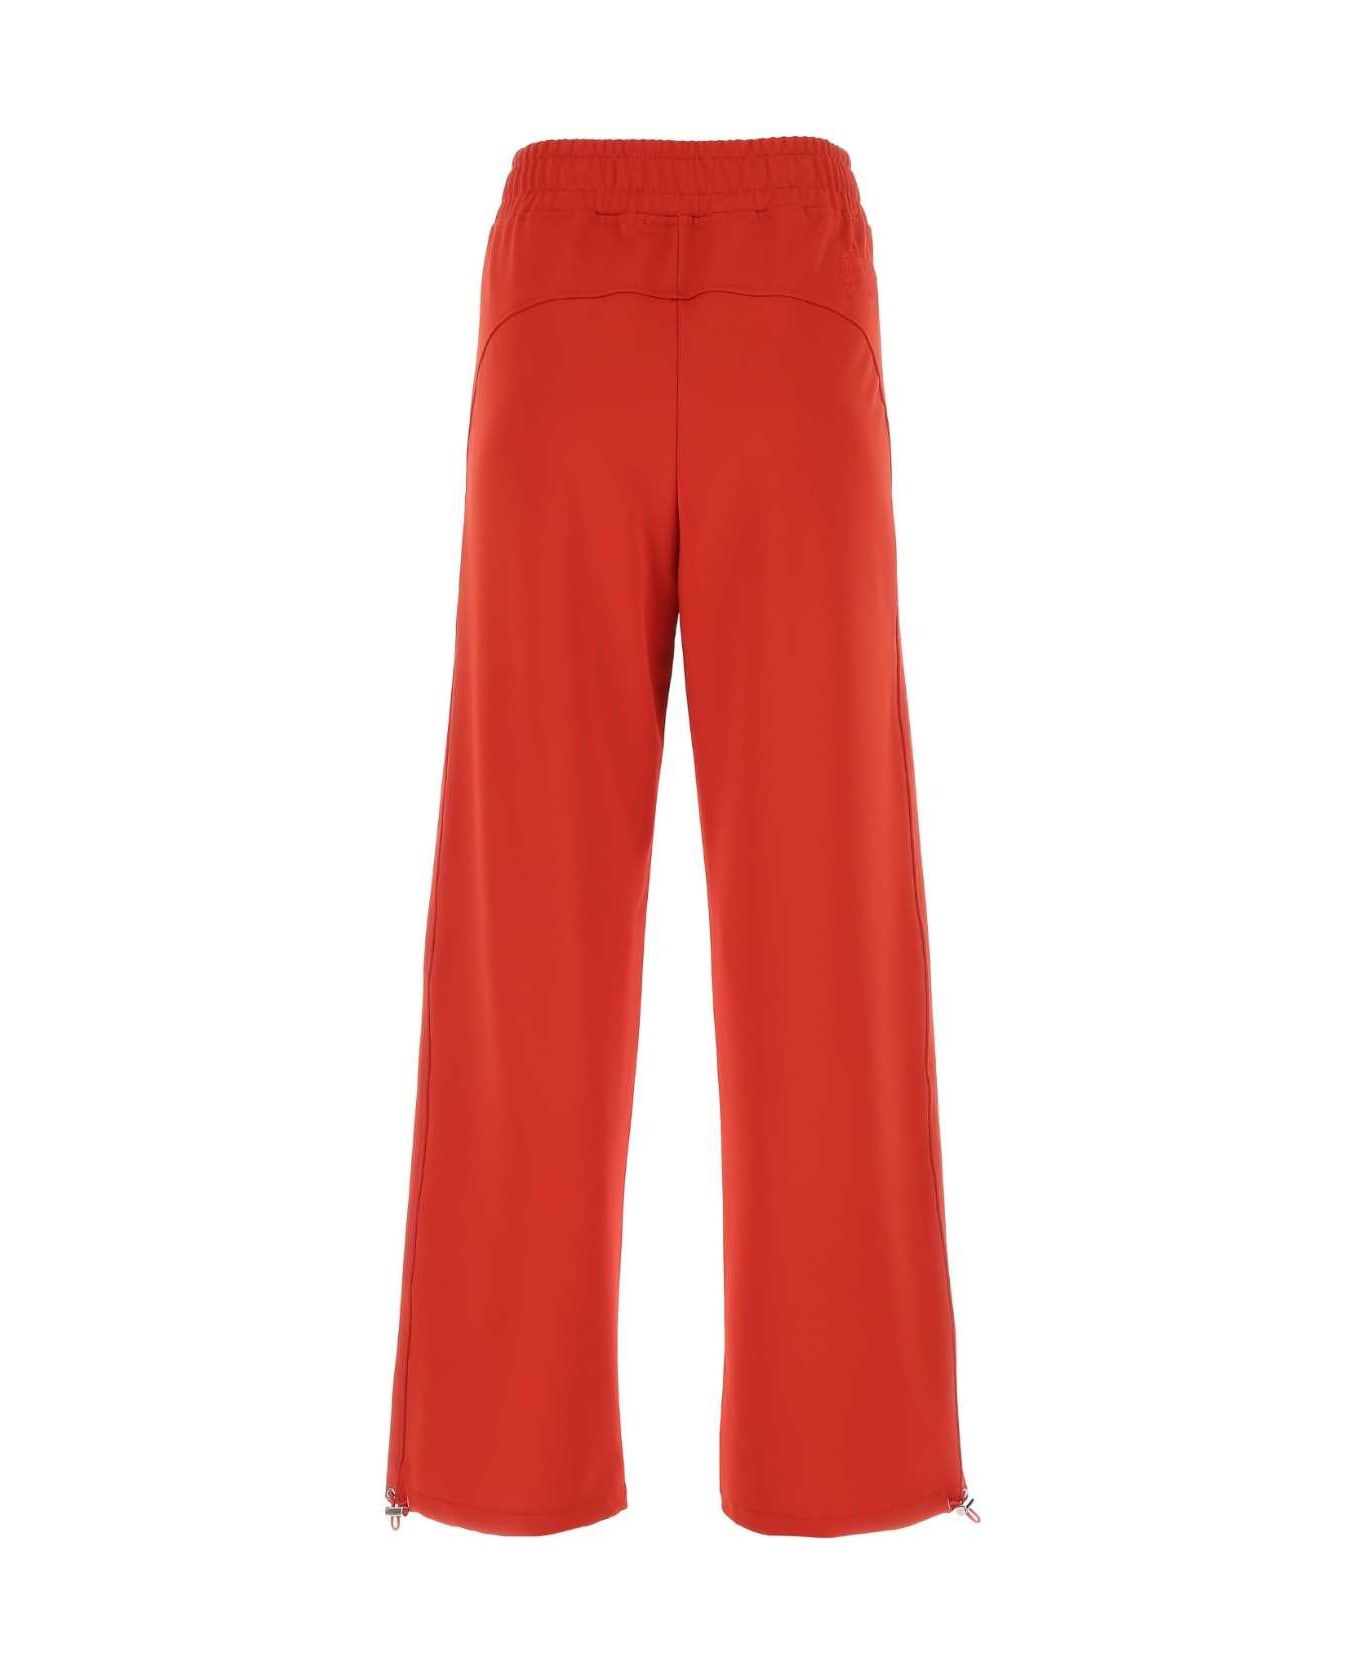 J.W. Anderson Red Stretch Polyester Pant - 450 ボトムス